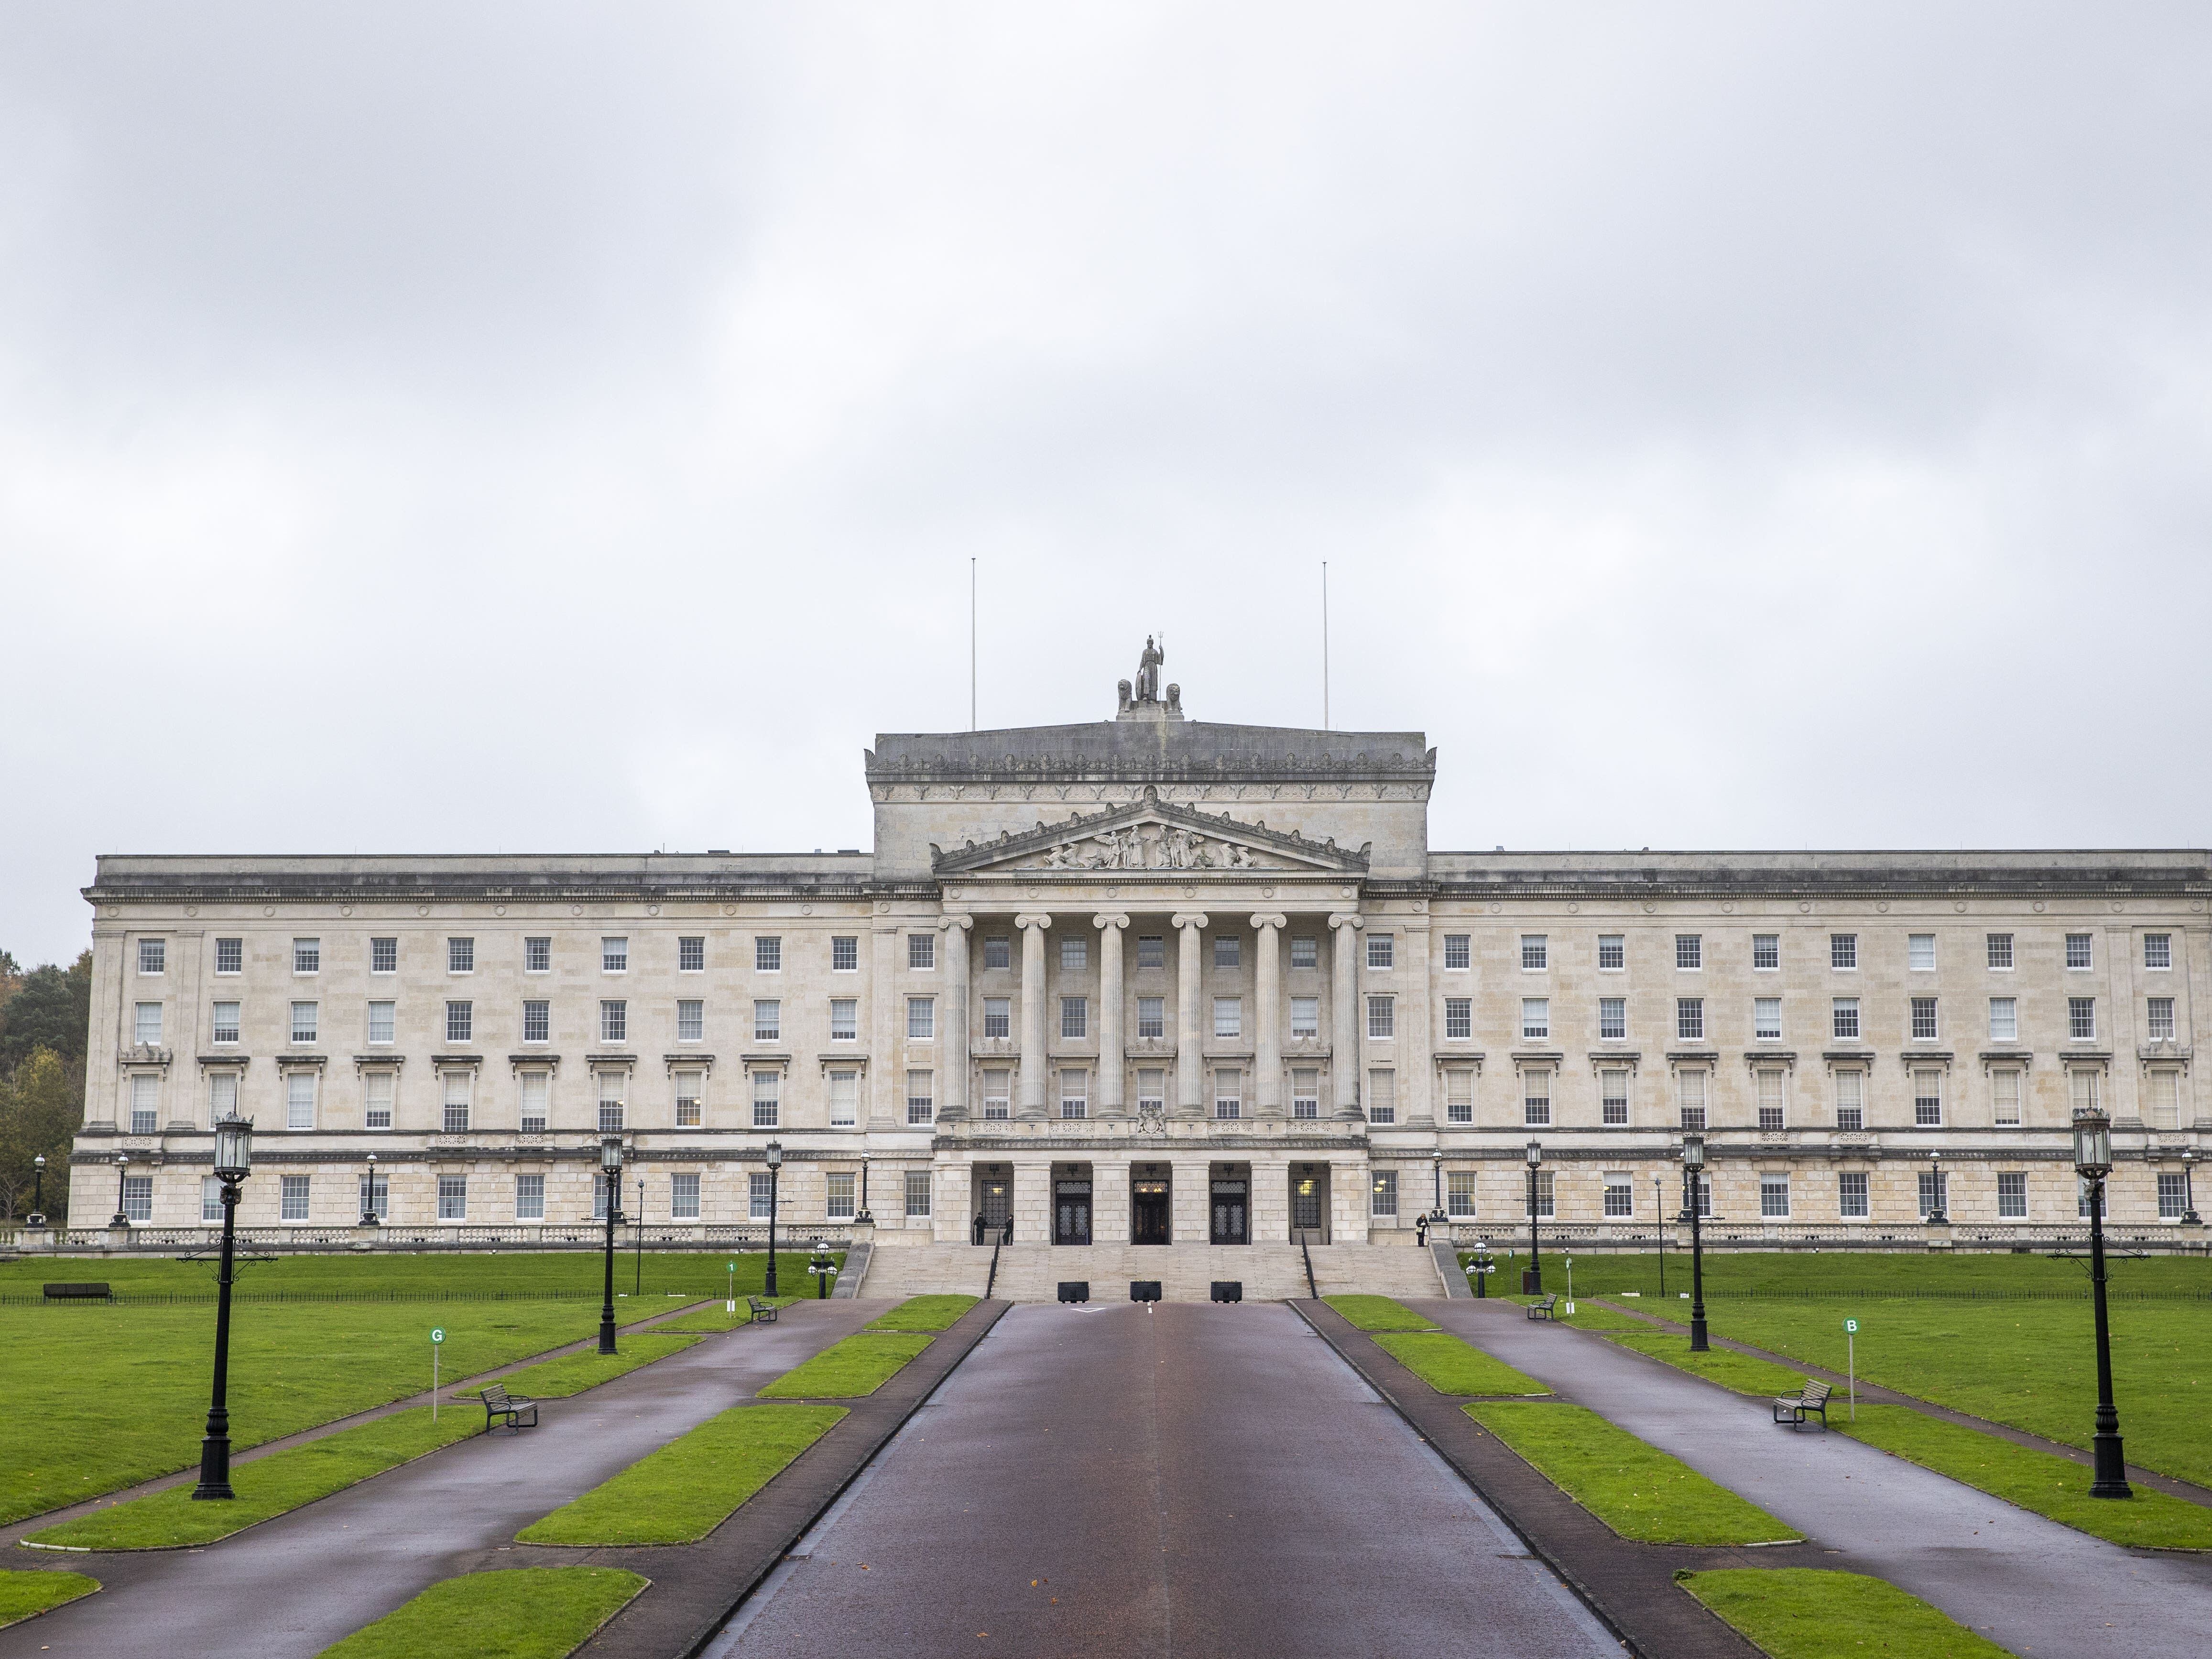 Infrastructure chief faces budget decisions they cannot make without Stormont